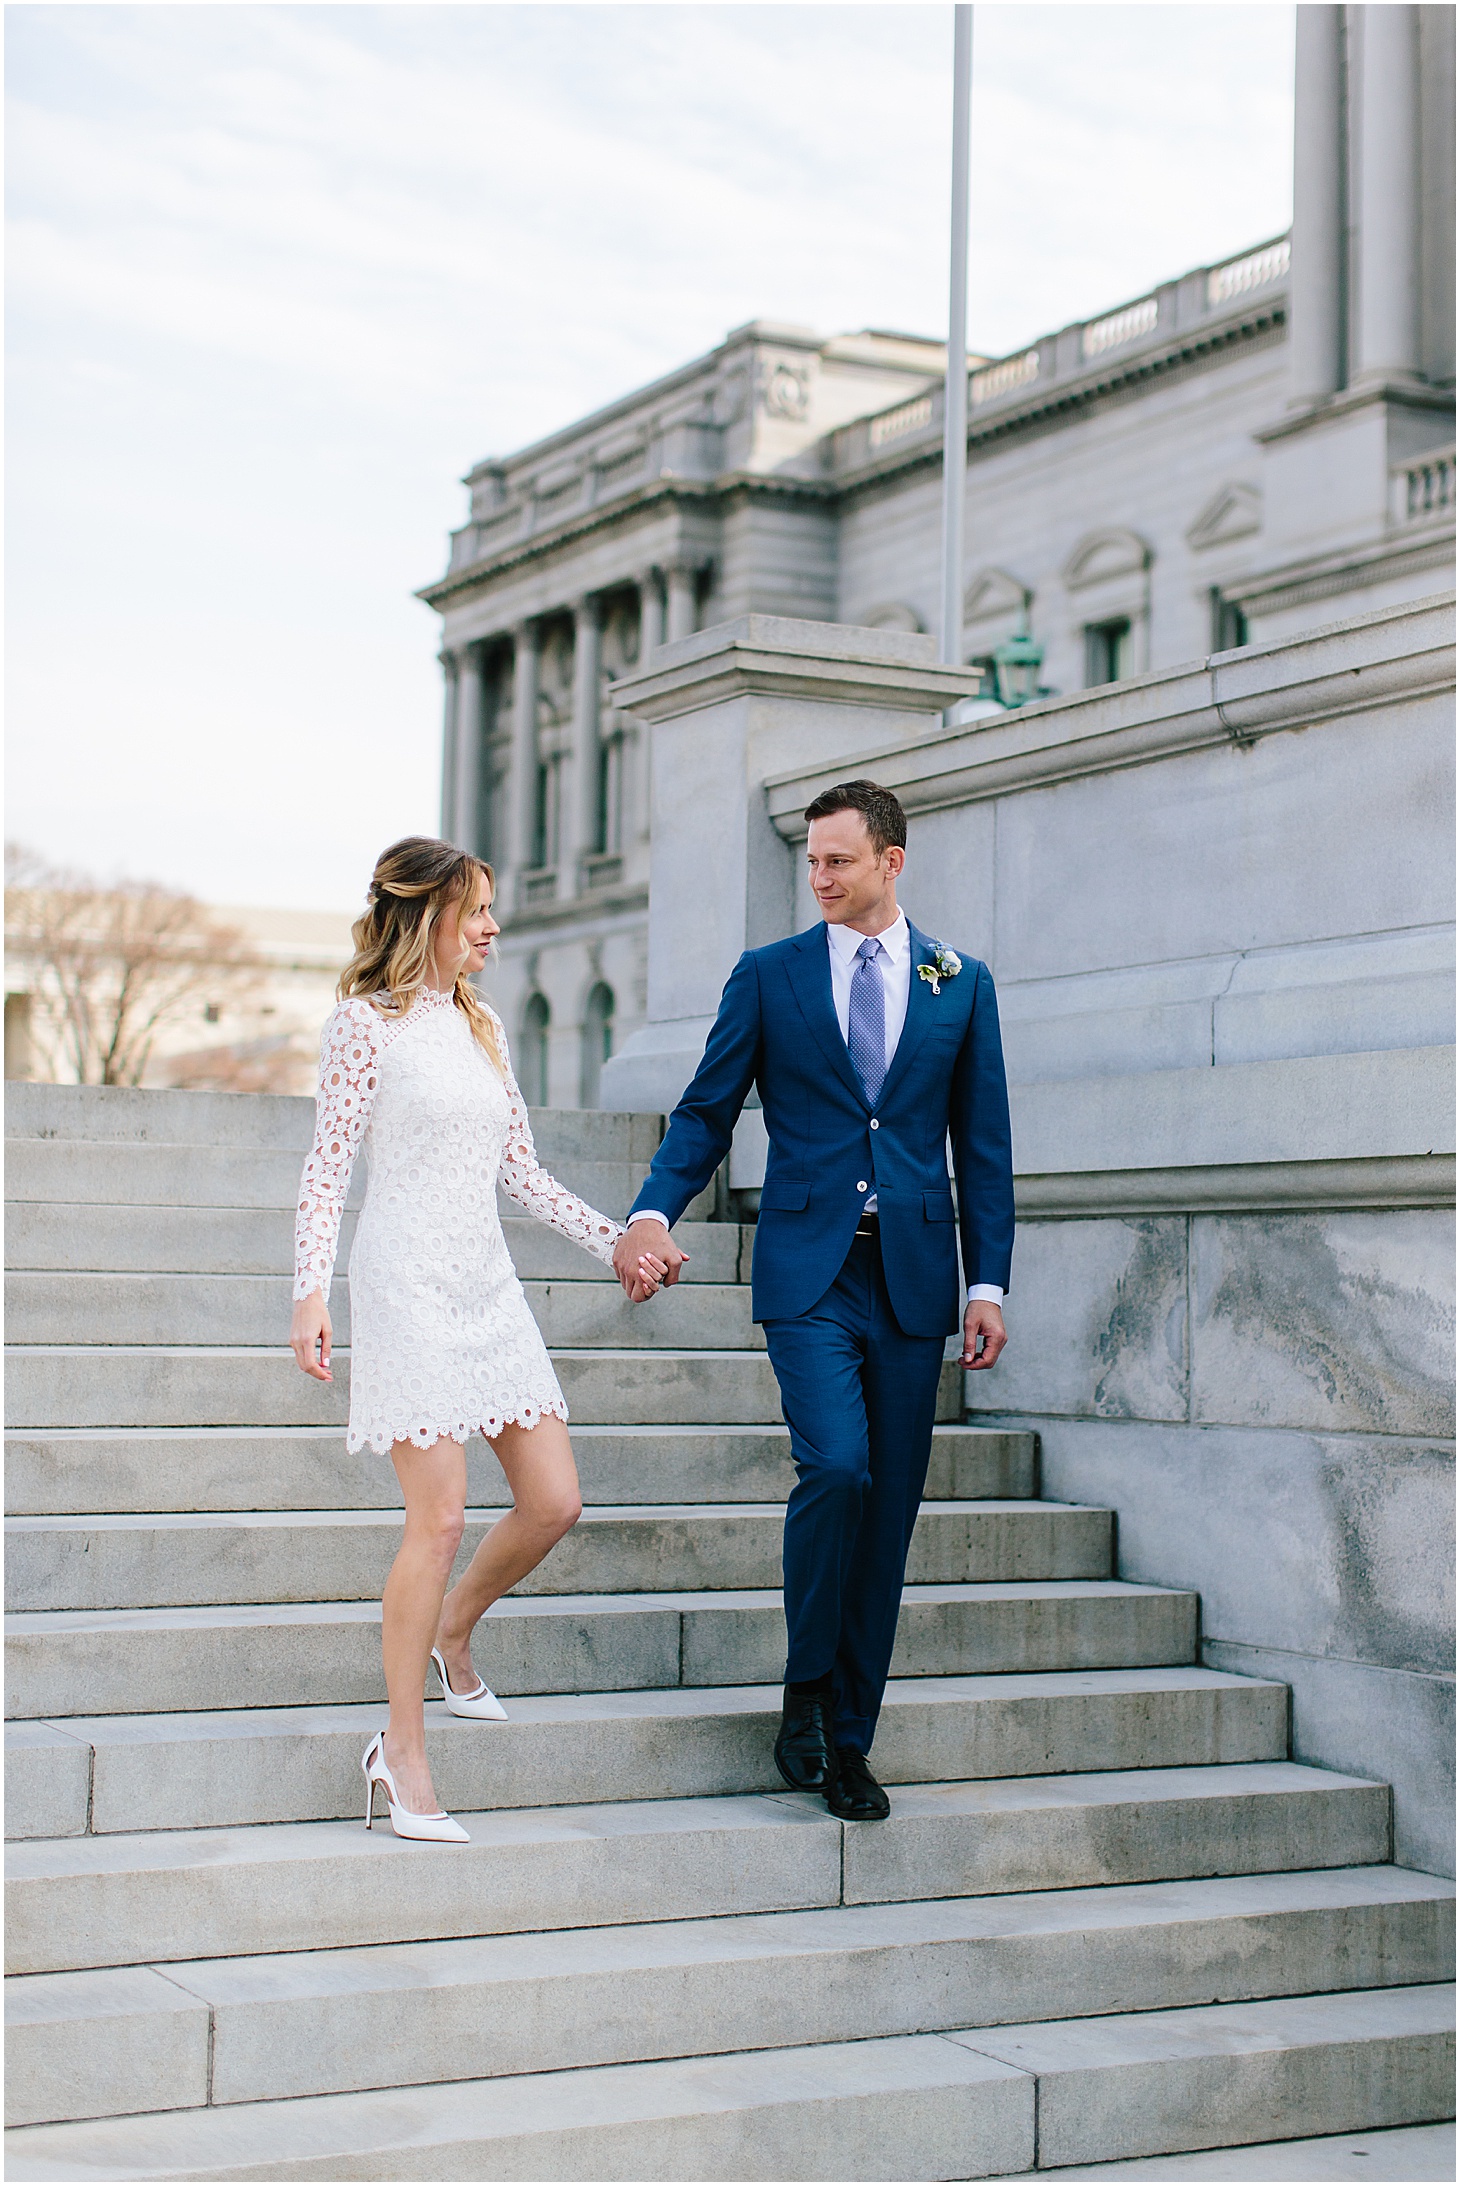 Wedding Portraits at Moultrie Courthouse, Cherry Blossom Elopement in Washington DC, Sarah Bradshaw Photography